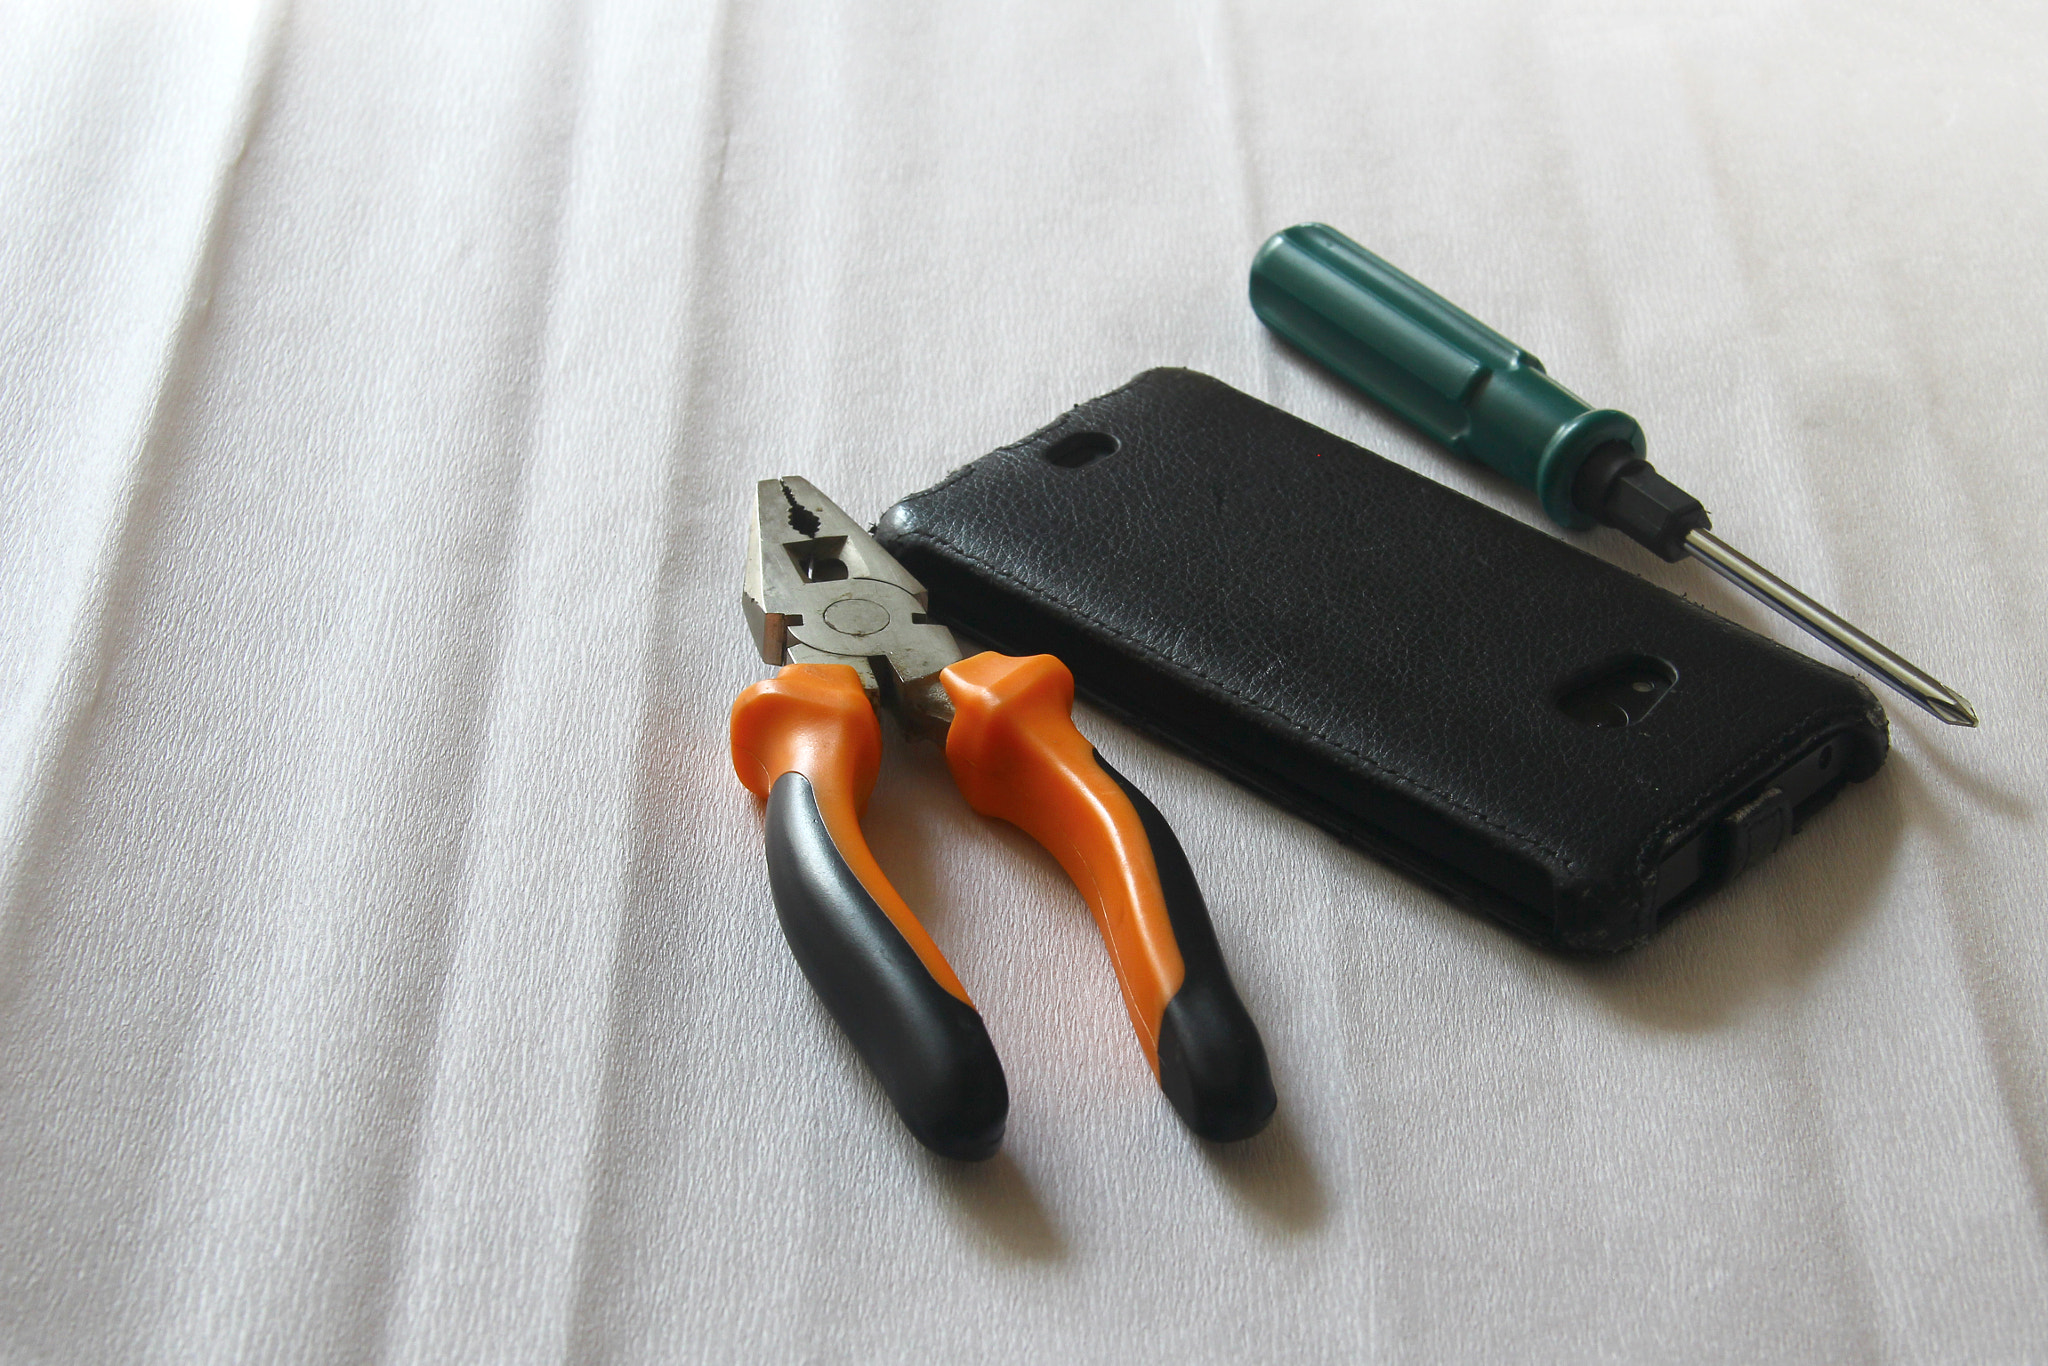 pliers, screwdriver and telephone